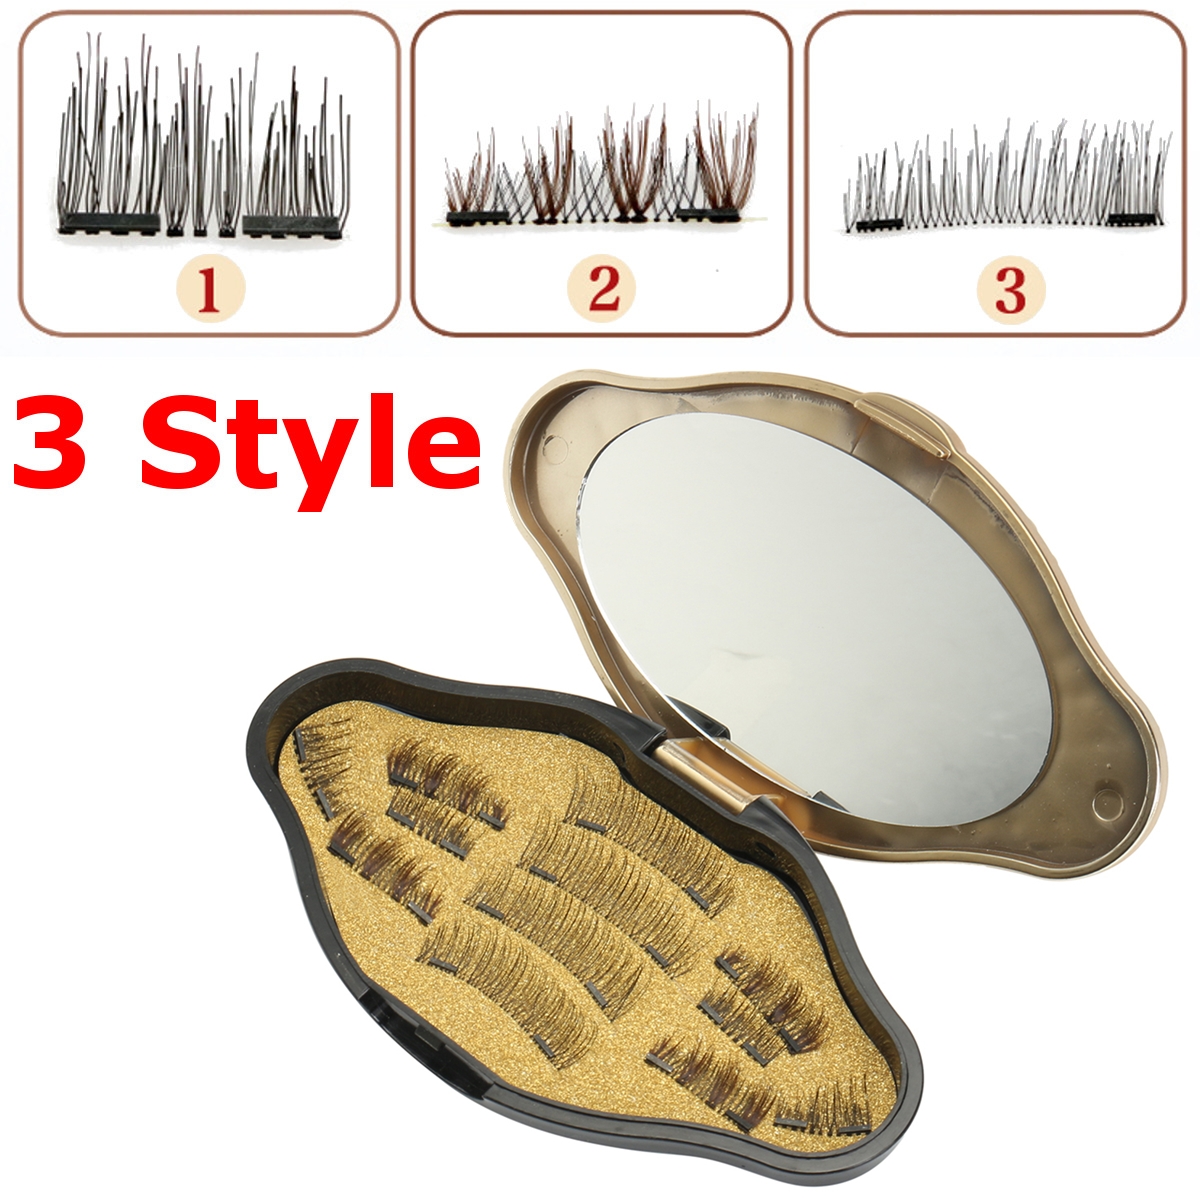 3-Style-Magnetic-Eyelashes-Makeup-Reusable-Long-Natural-Eyelashes-Extension-With-Mirror-1242835